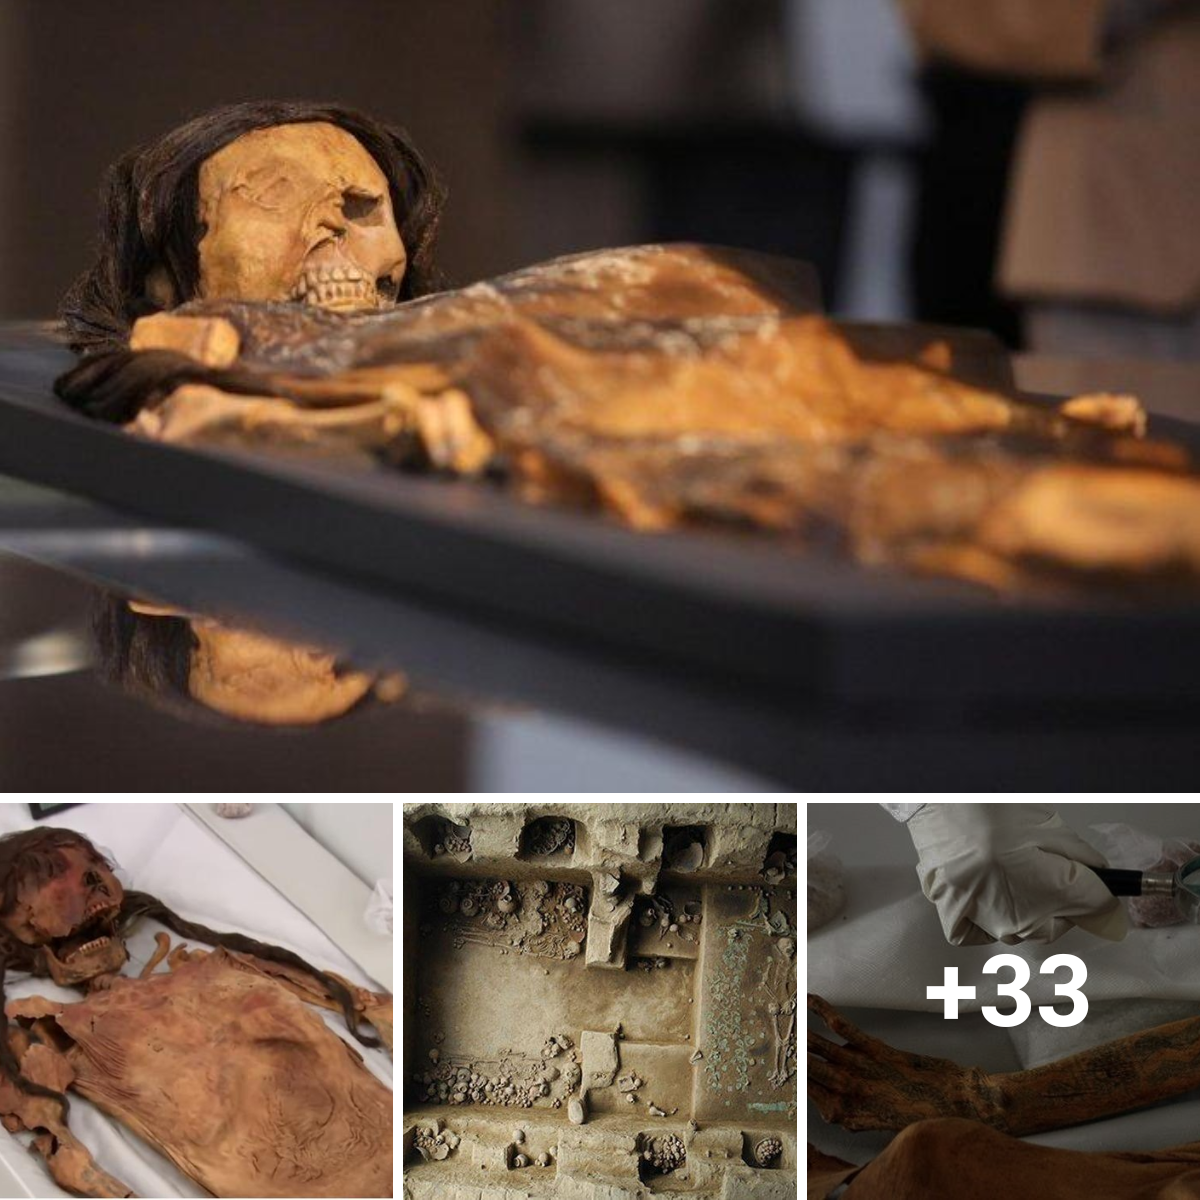 revealing historical marvels: A female Moche mummy that has survived for more than 1,200 years was found by researchers at the El Brujo archeological site.